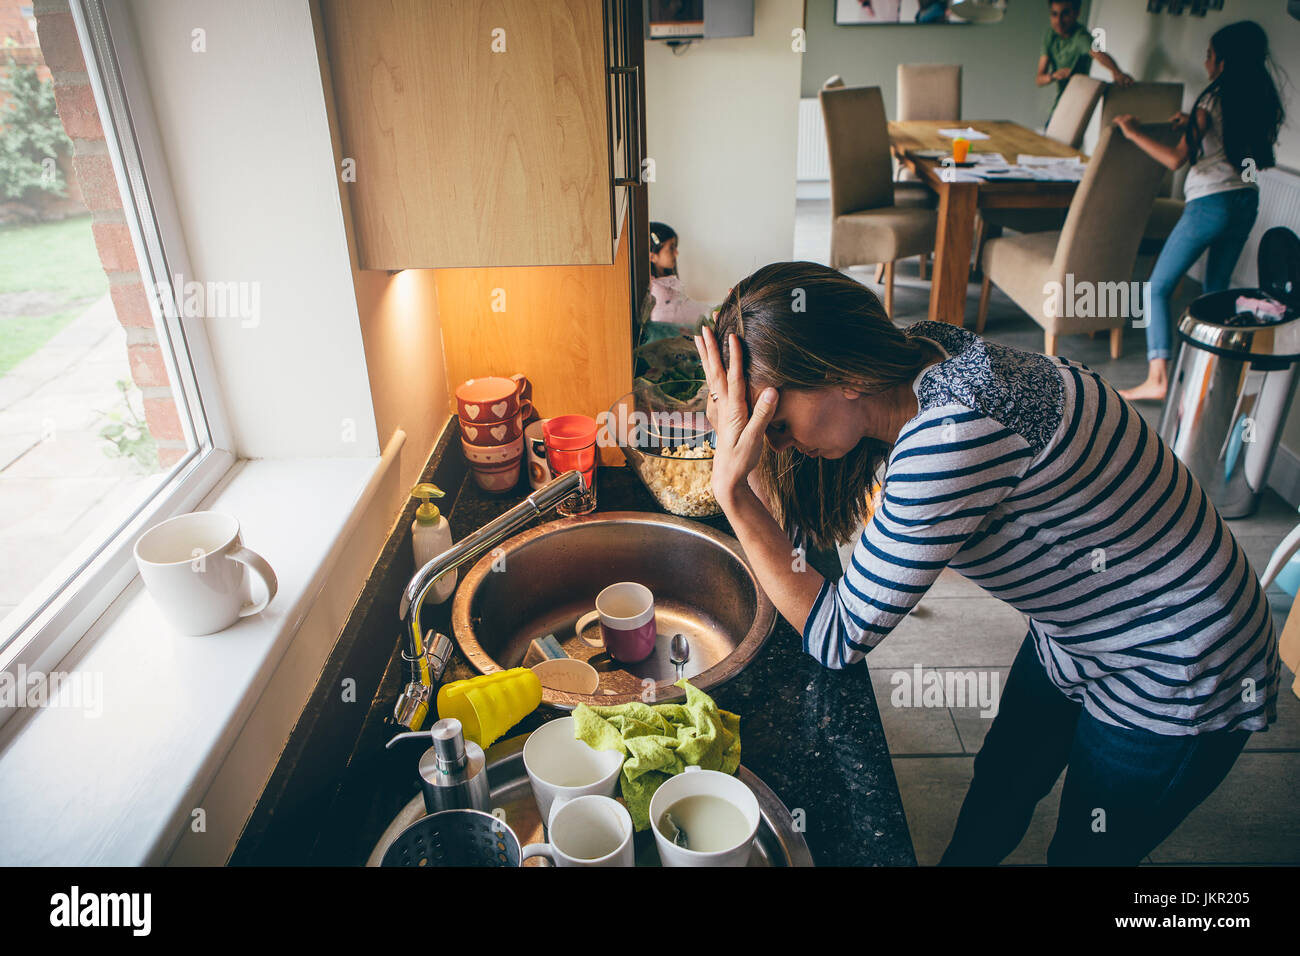 Stressed mum at home. She has her head in her hands at a messy kitchen sink and her children are running round in the background. Stock Photo